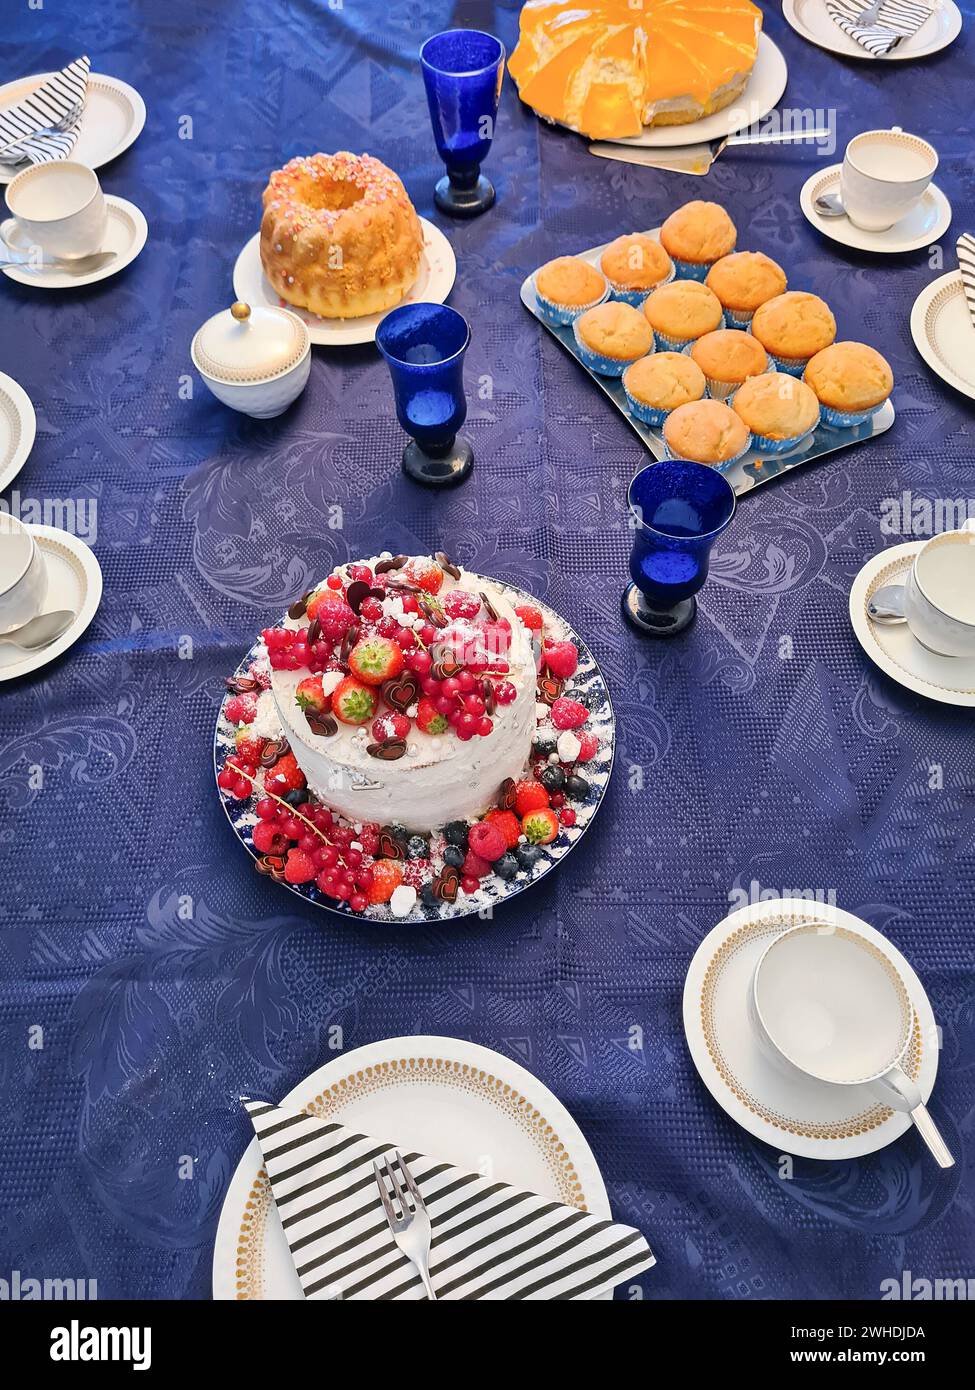 A festively decorated birthday table with various cakes and pastries on a blue tablecloth Stock Photo